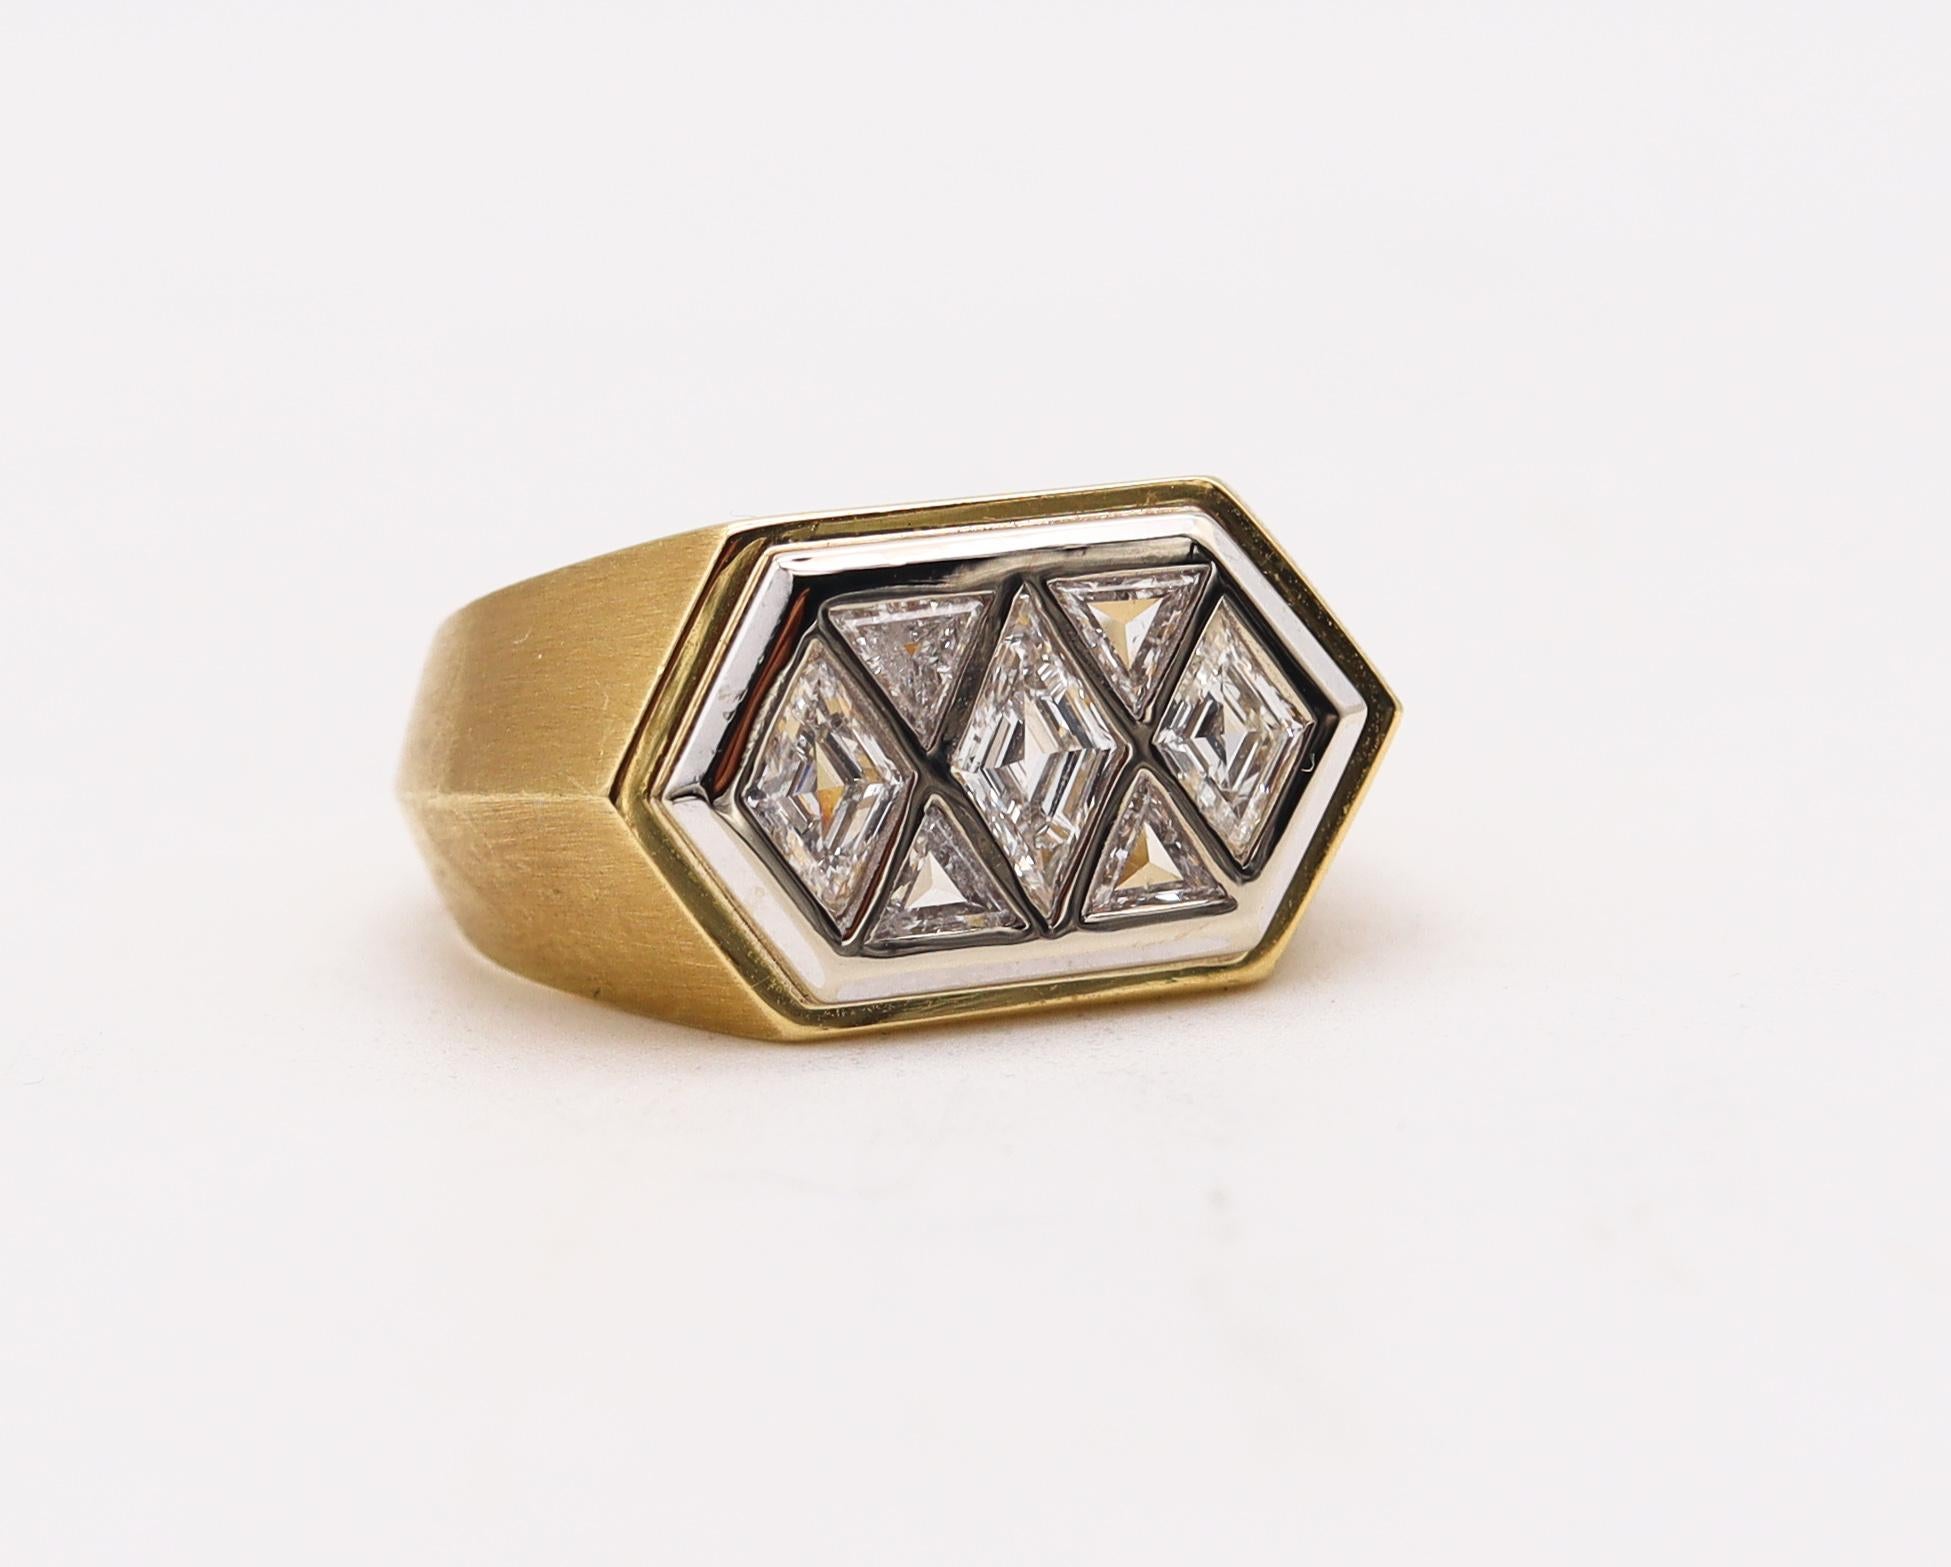 Modernist Gem set Geometric Signet Ring In 18Kt Gold And Platinum With 2.82 Ctw Diamonds